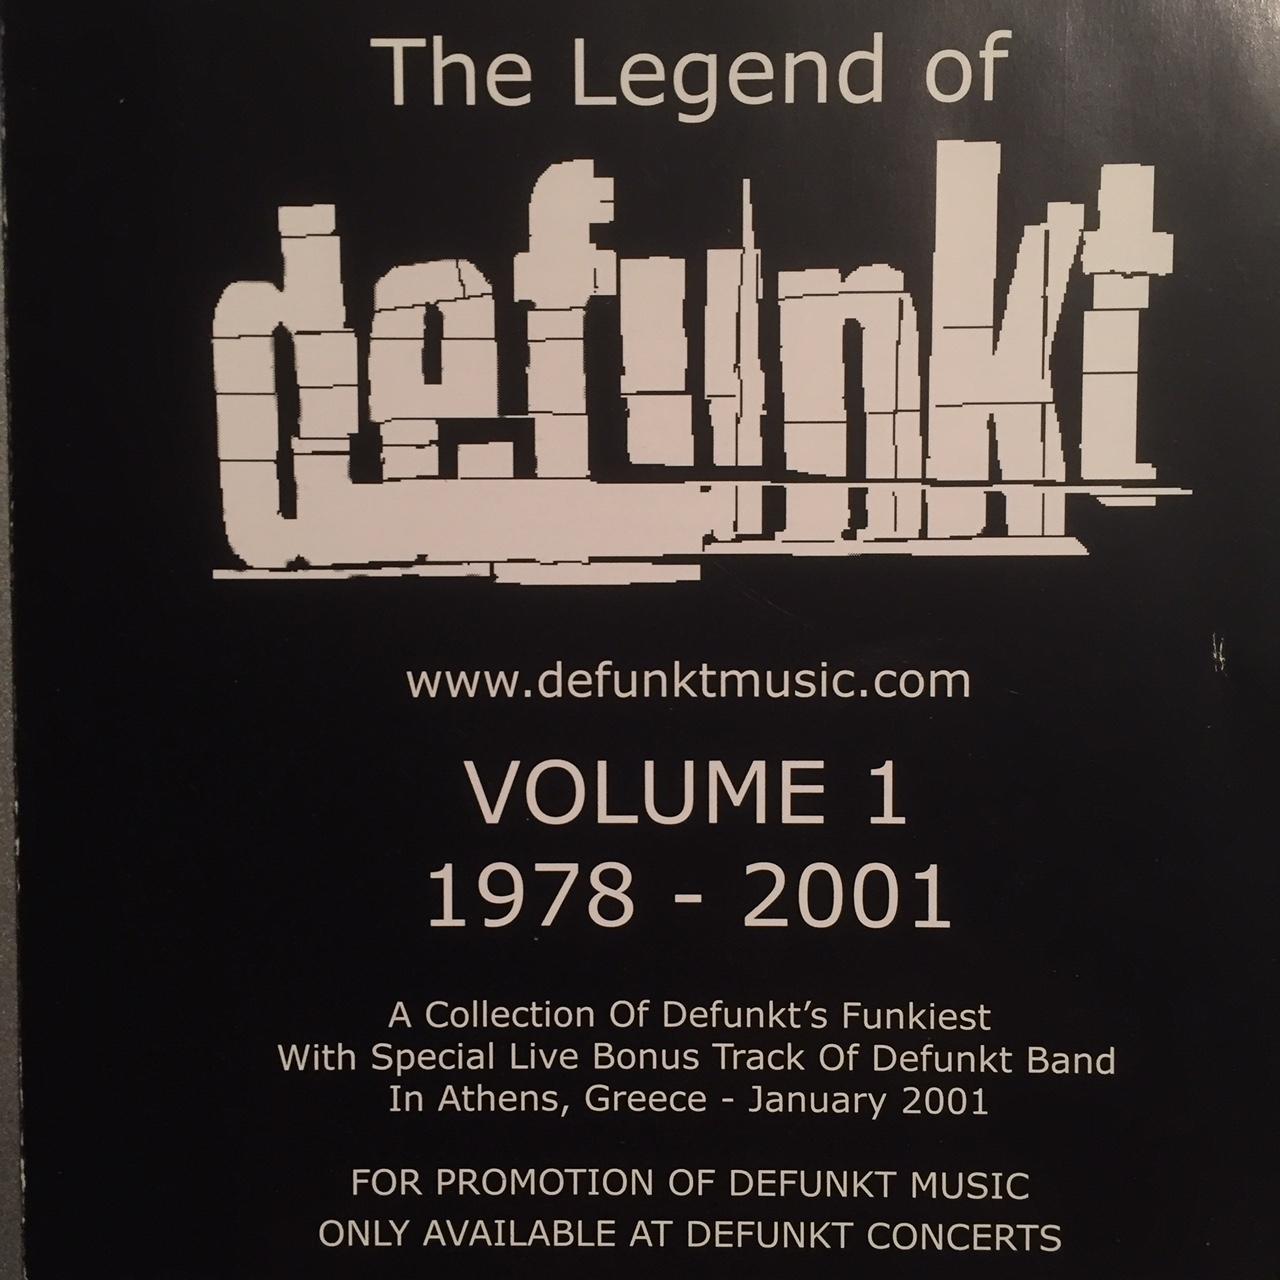 The Legend of Defunkt